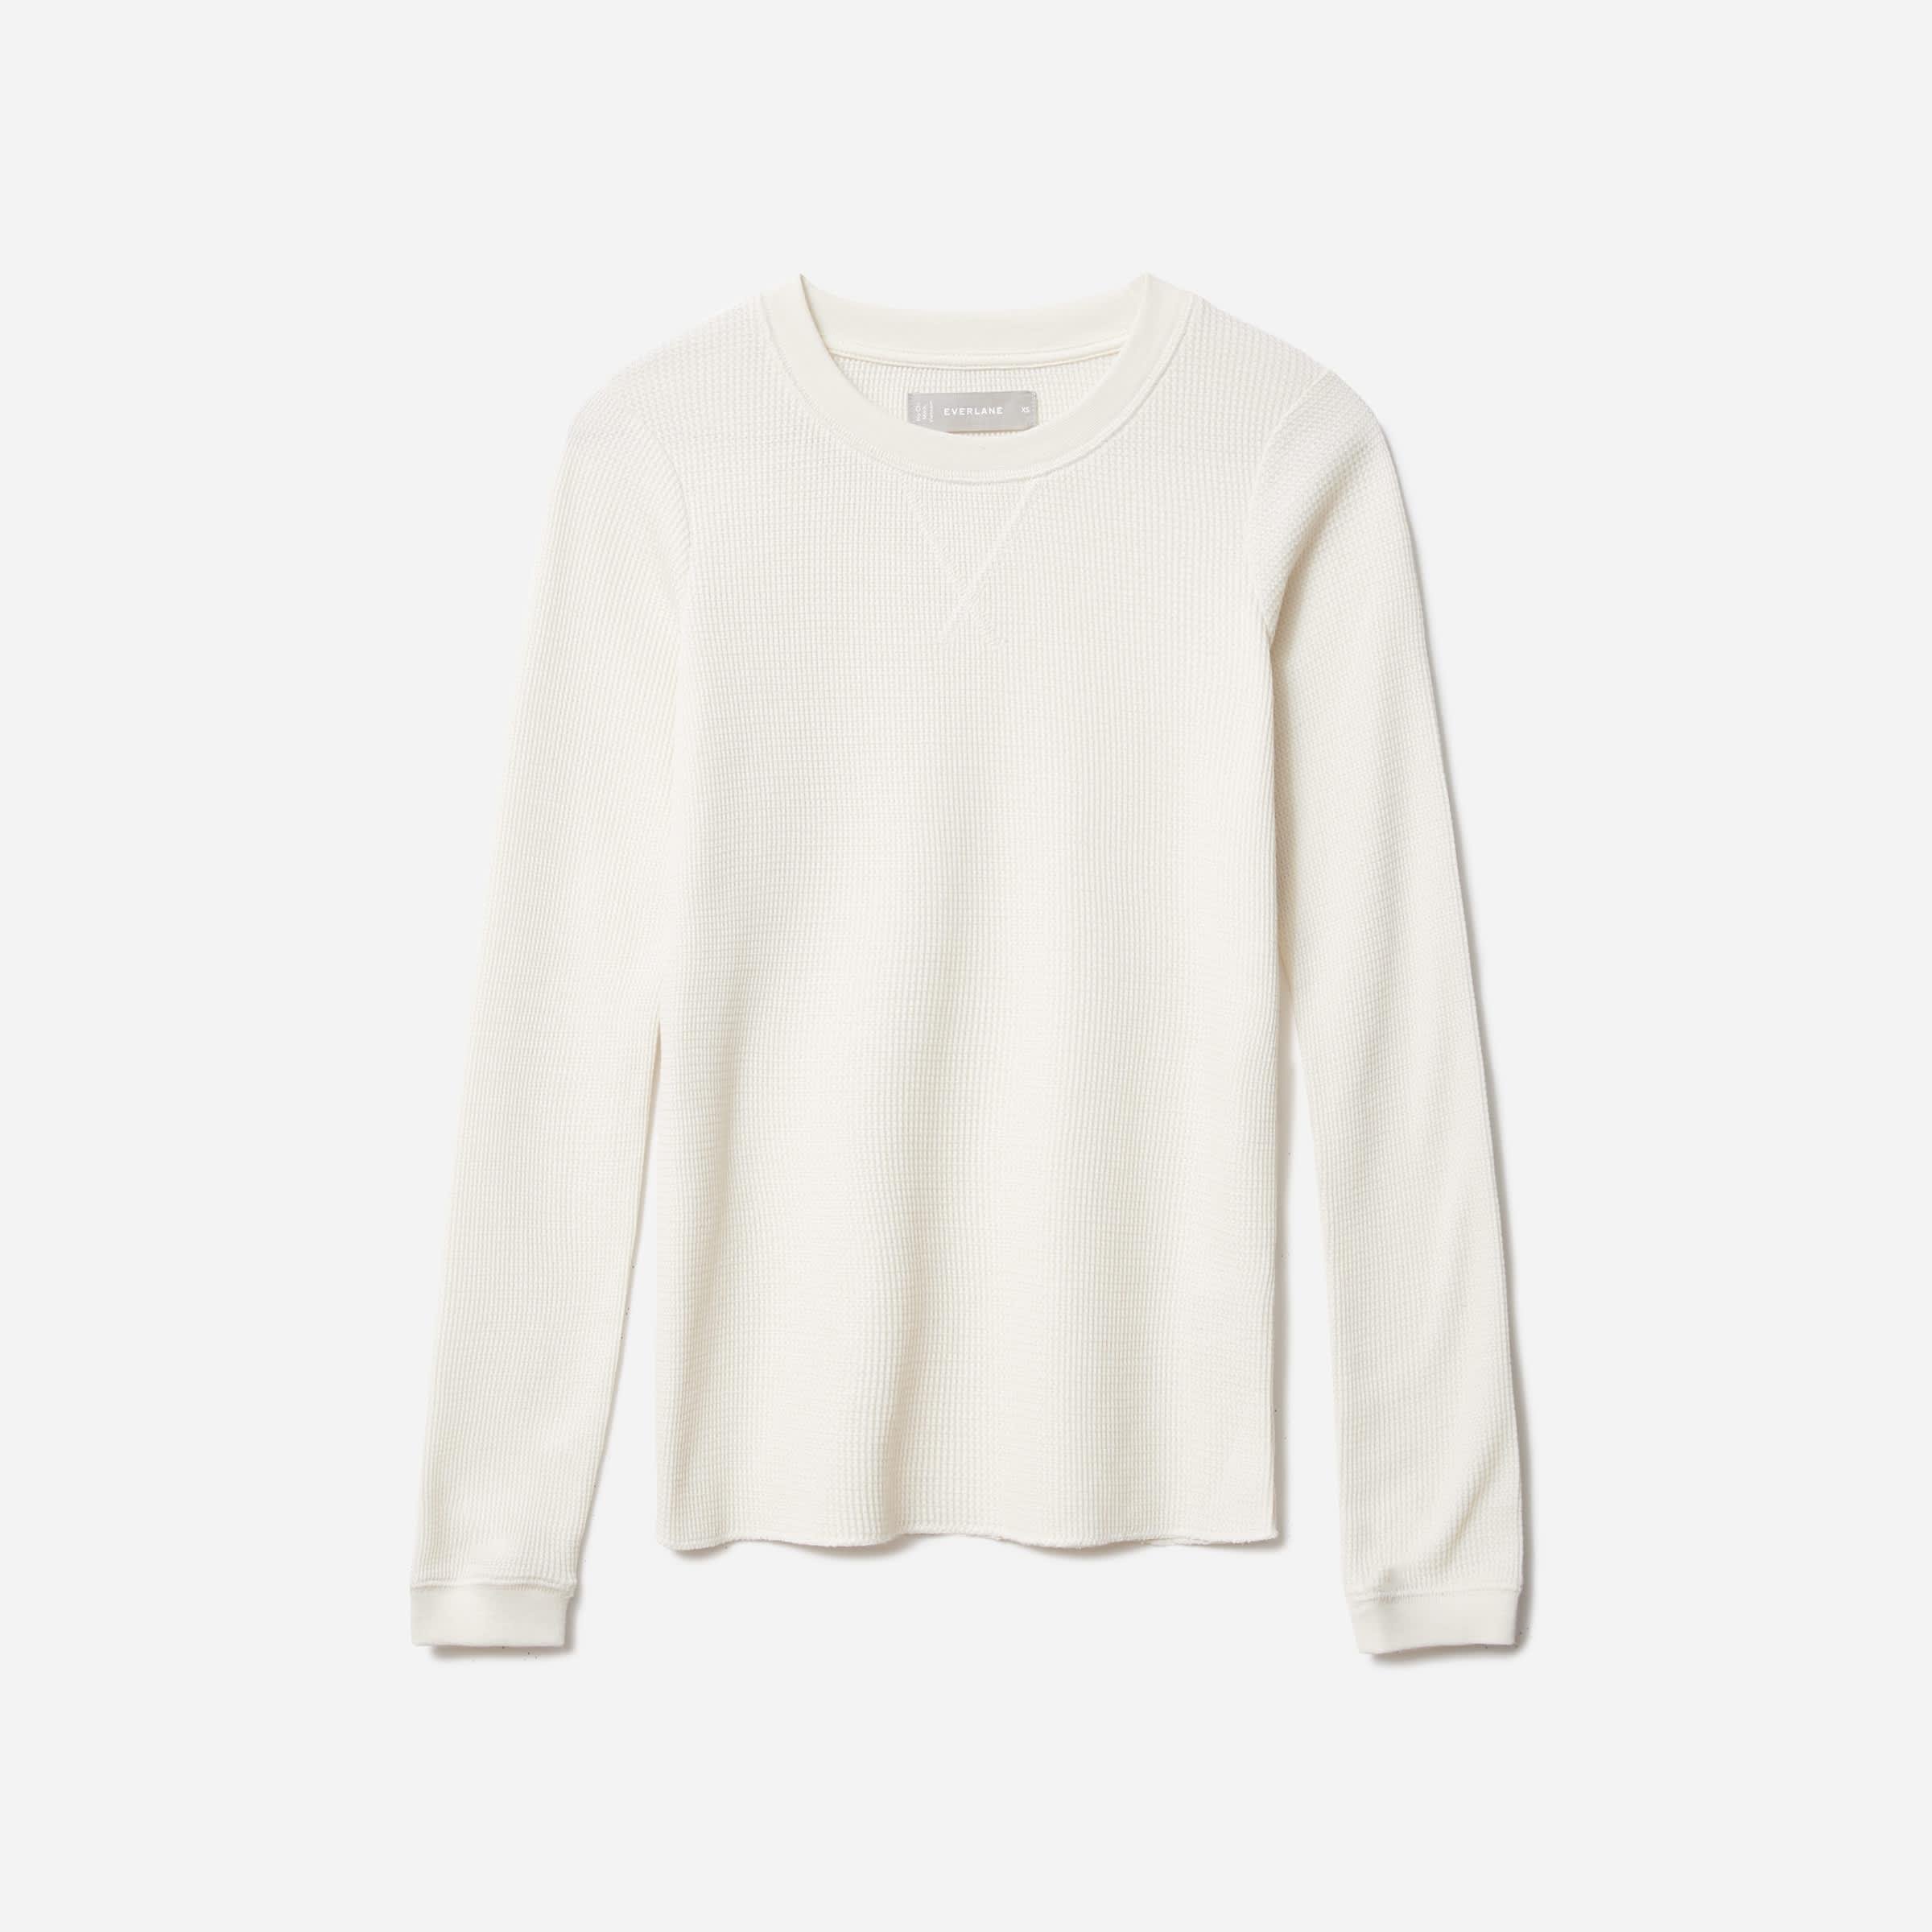 The Organic Cotton Waffle Tee by EVERLANE